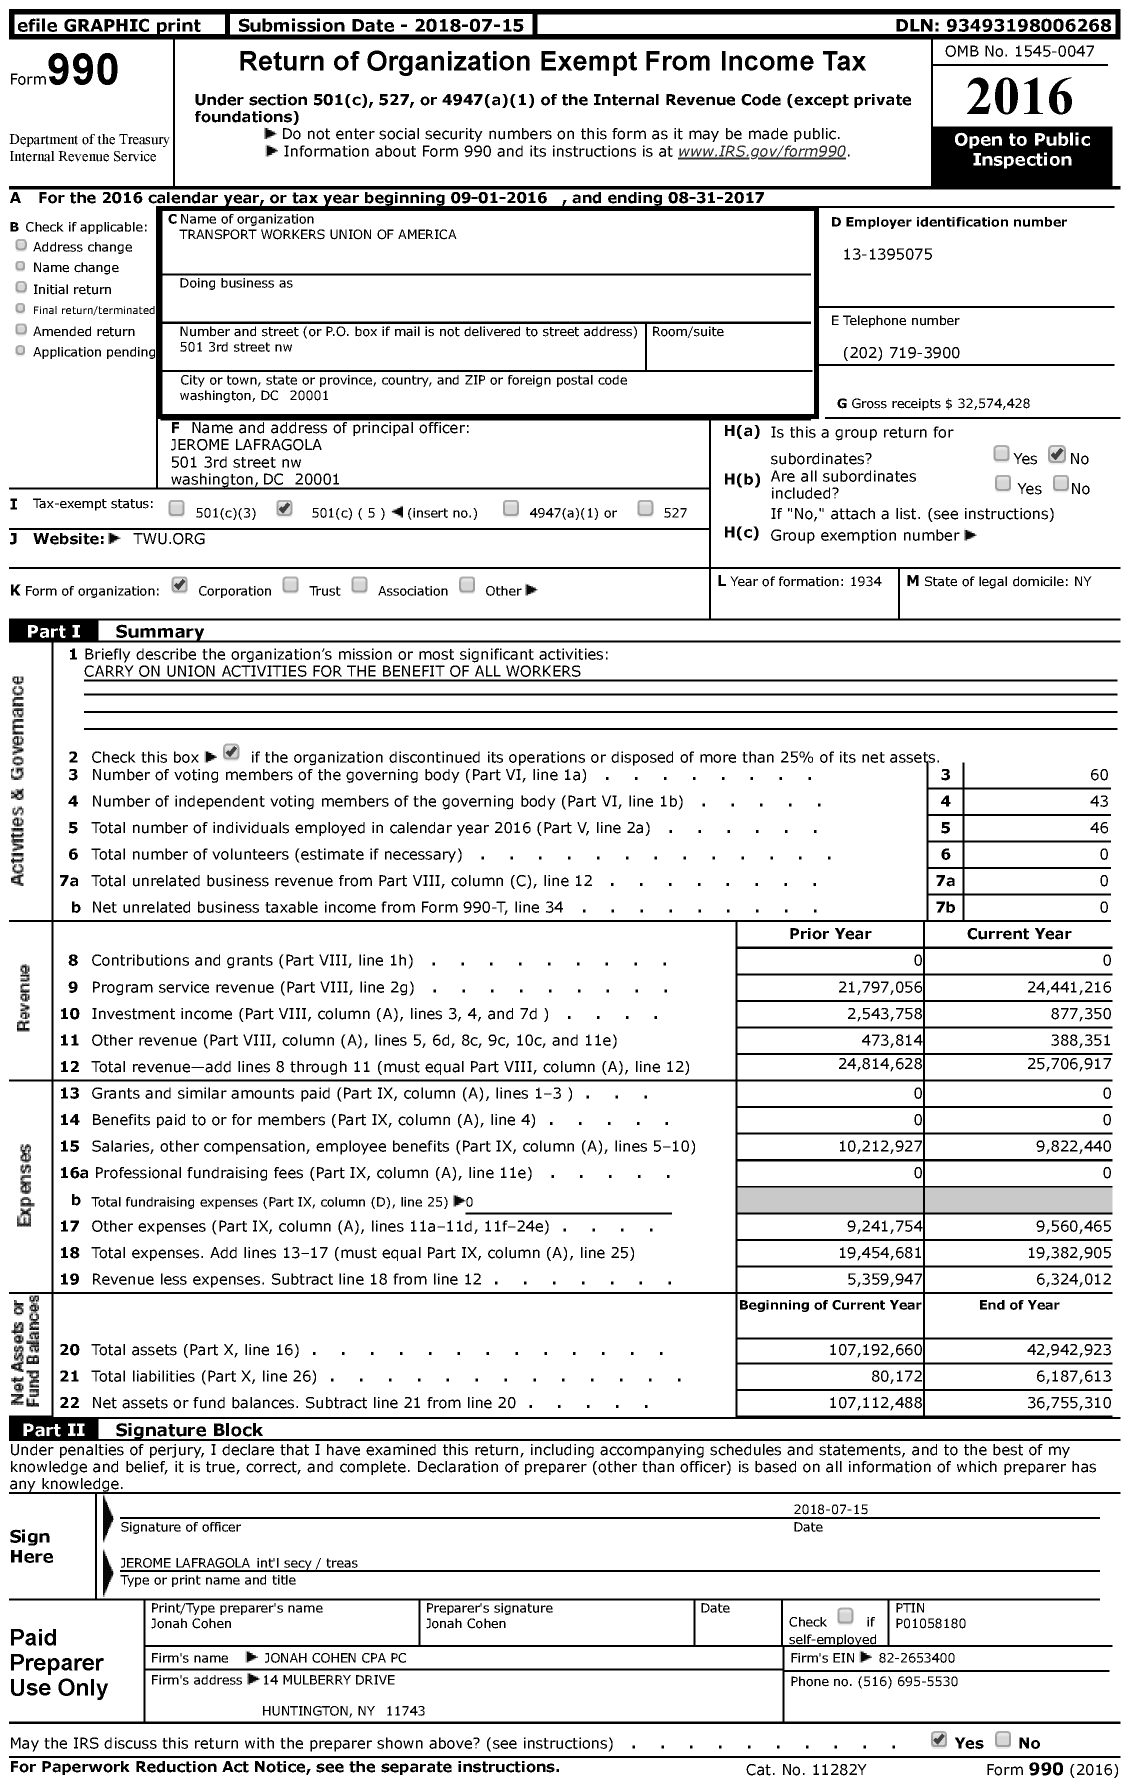 Image of first page of 2016 Form 990 for Transport Workers Union of America (TWU)